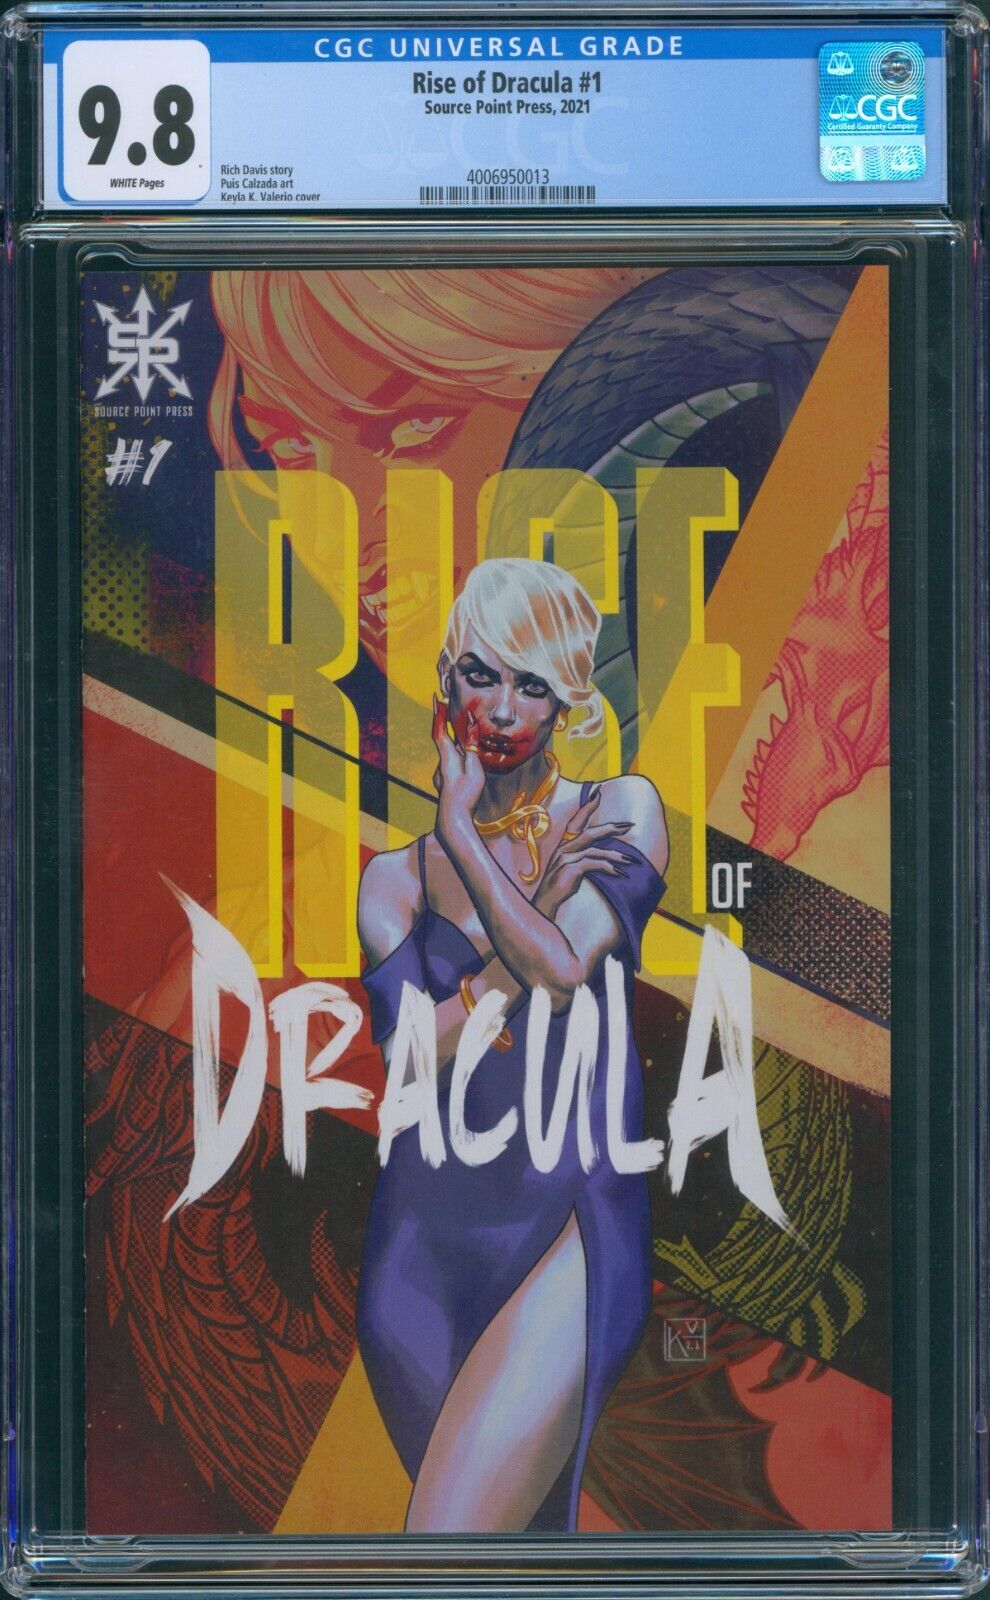 Rise of Dracula # 1 CGC 9.8 Cover A Source Point Press 2021 Cult of Dracula